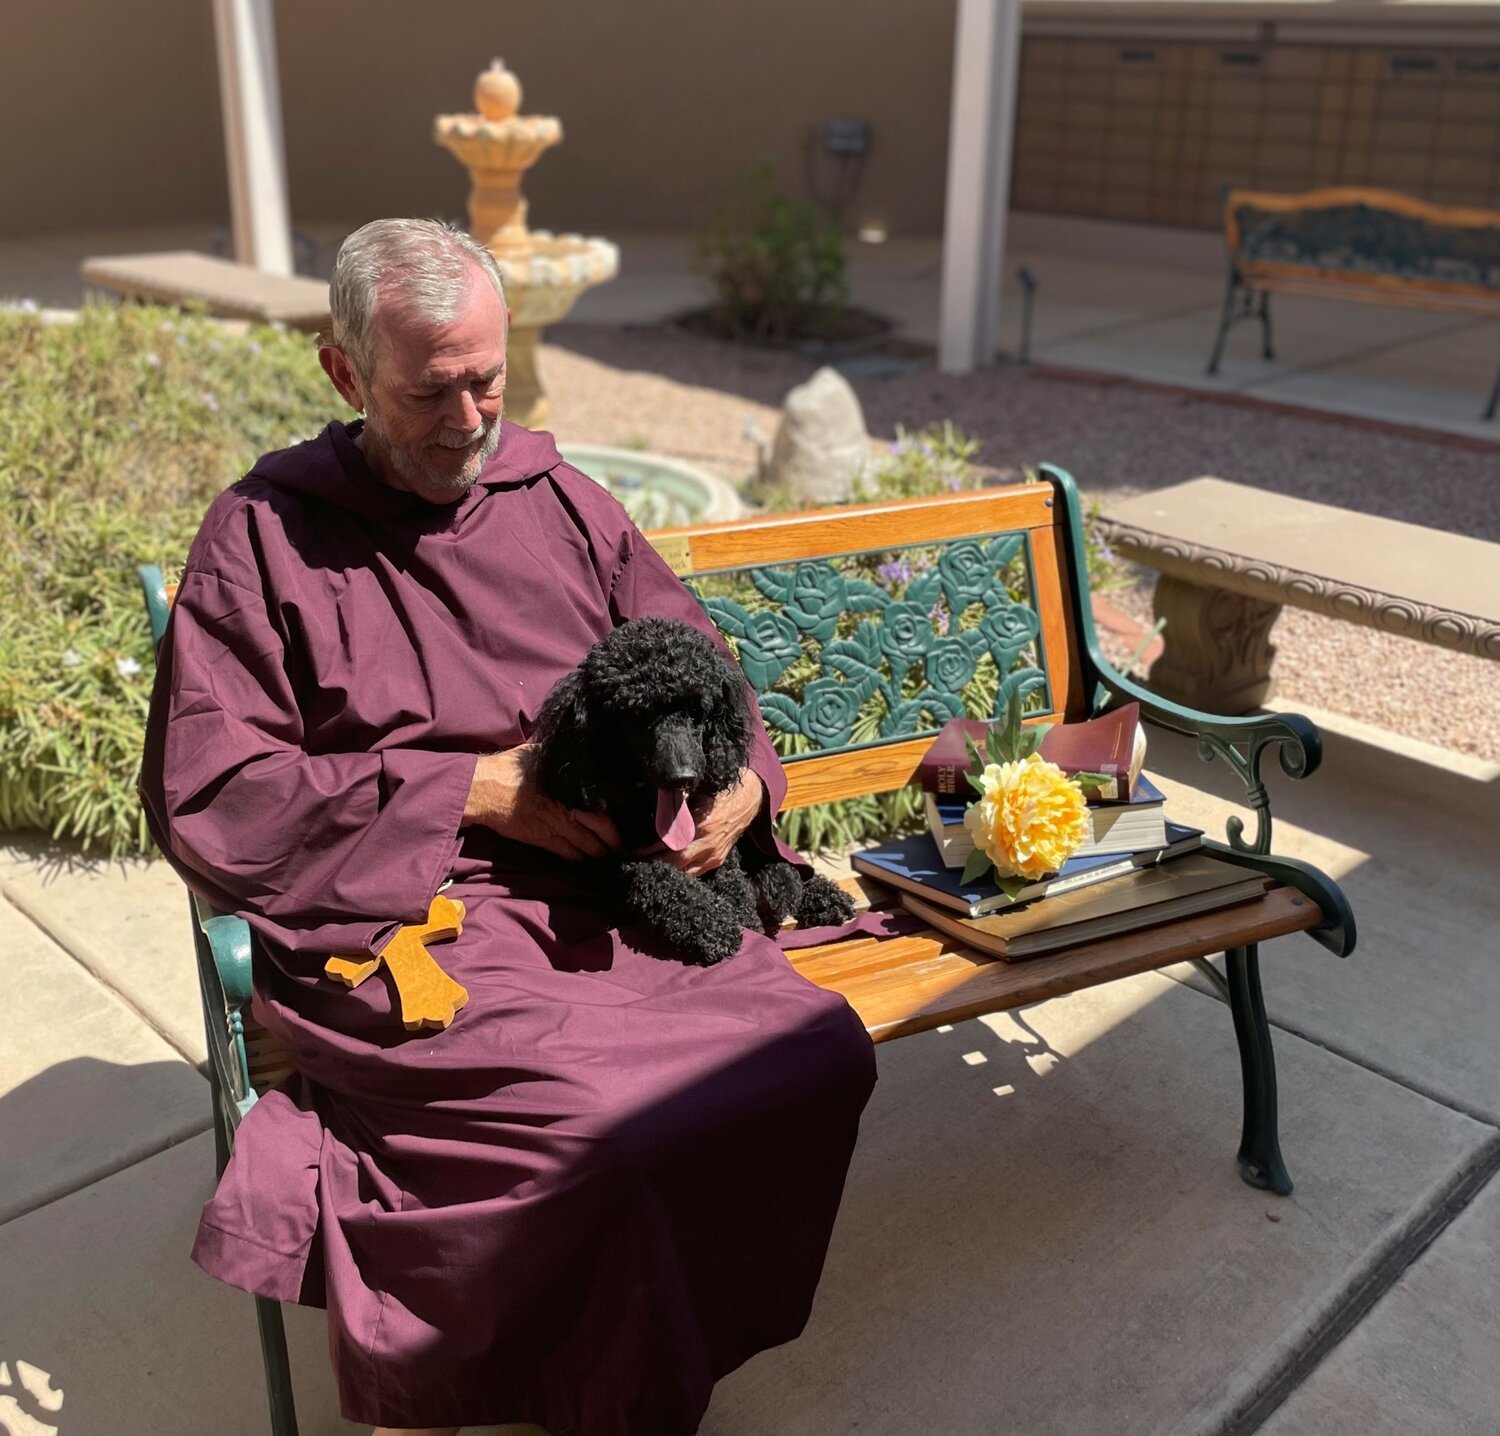 A Blessing of the Animals event is 1 p.m. Saturday, Oct. 7, in the courtyard of Shepherd of the Hills United Methodist Church, 13658 W. Meeker Blvd.